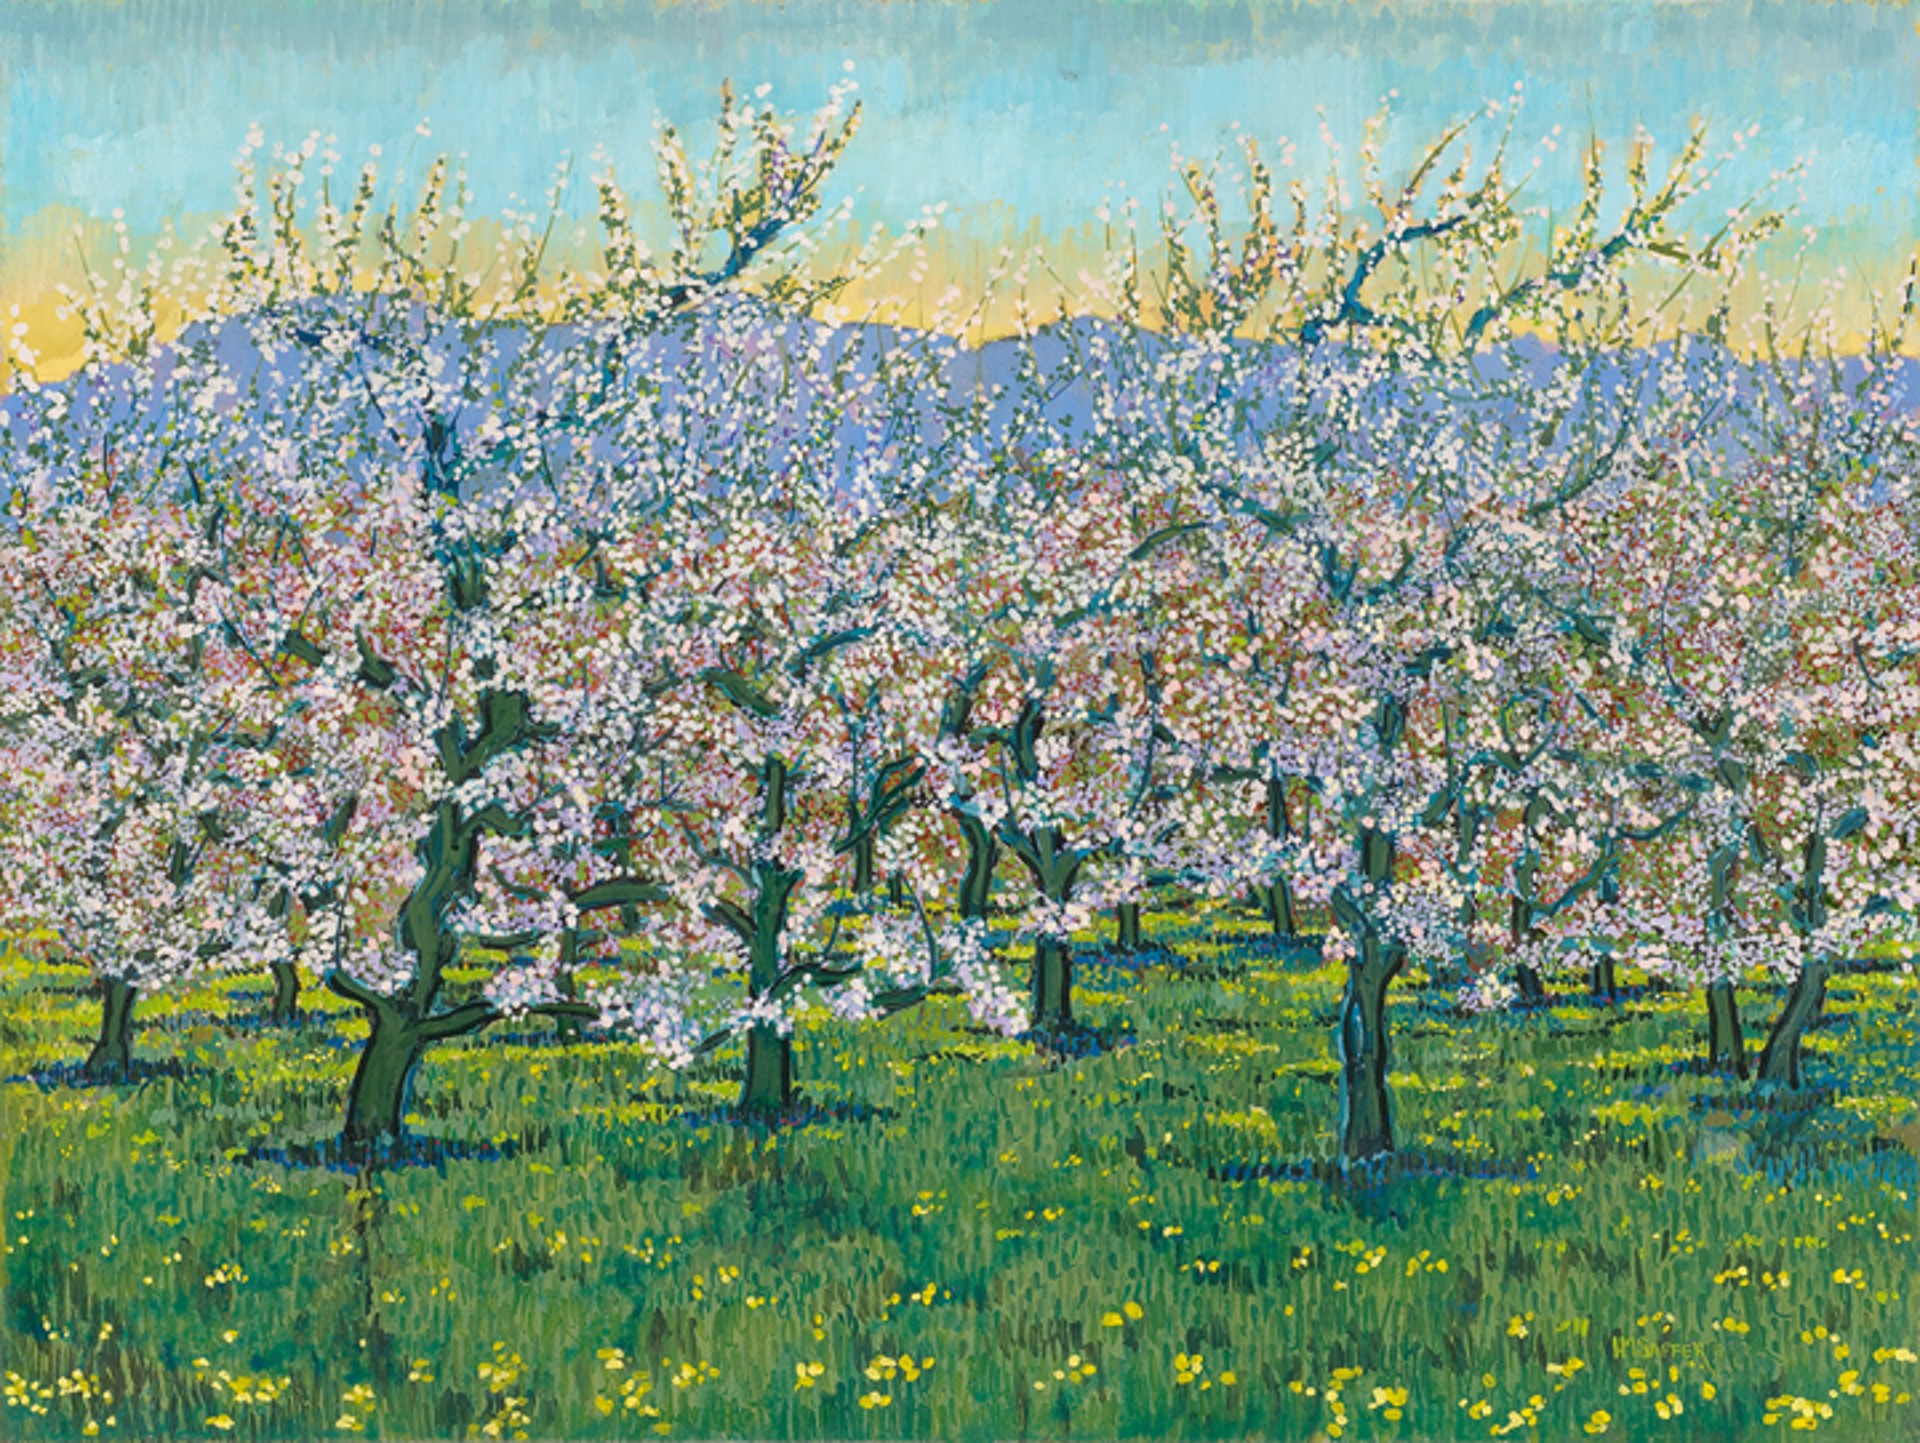 Orchard on Route 9 by H.M. Saffer II